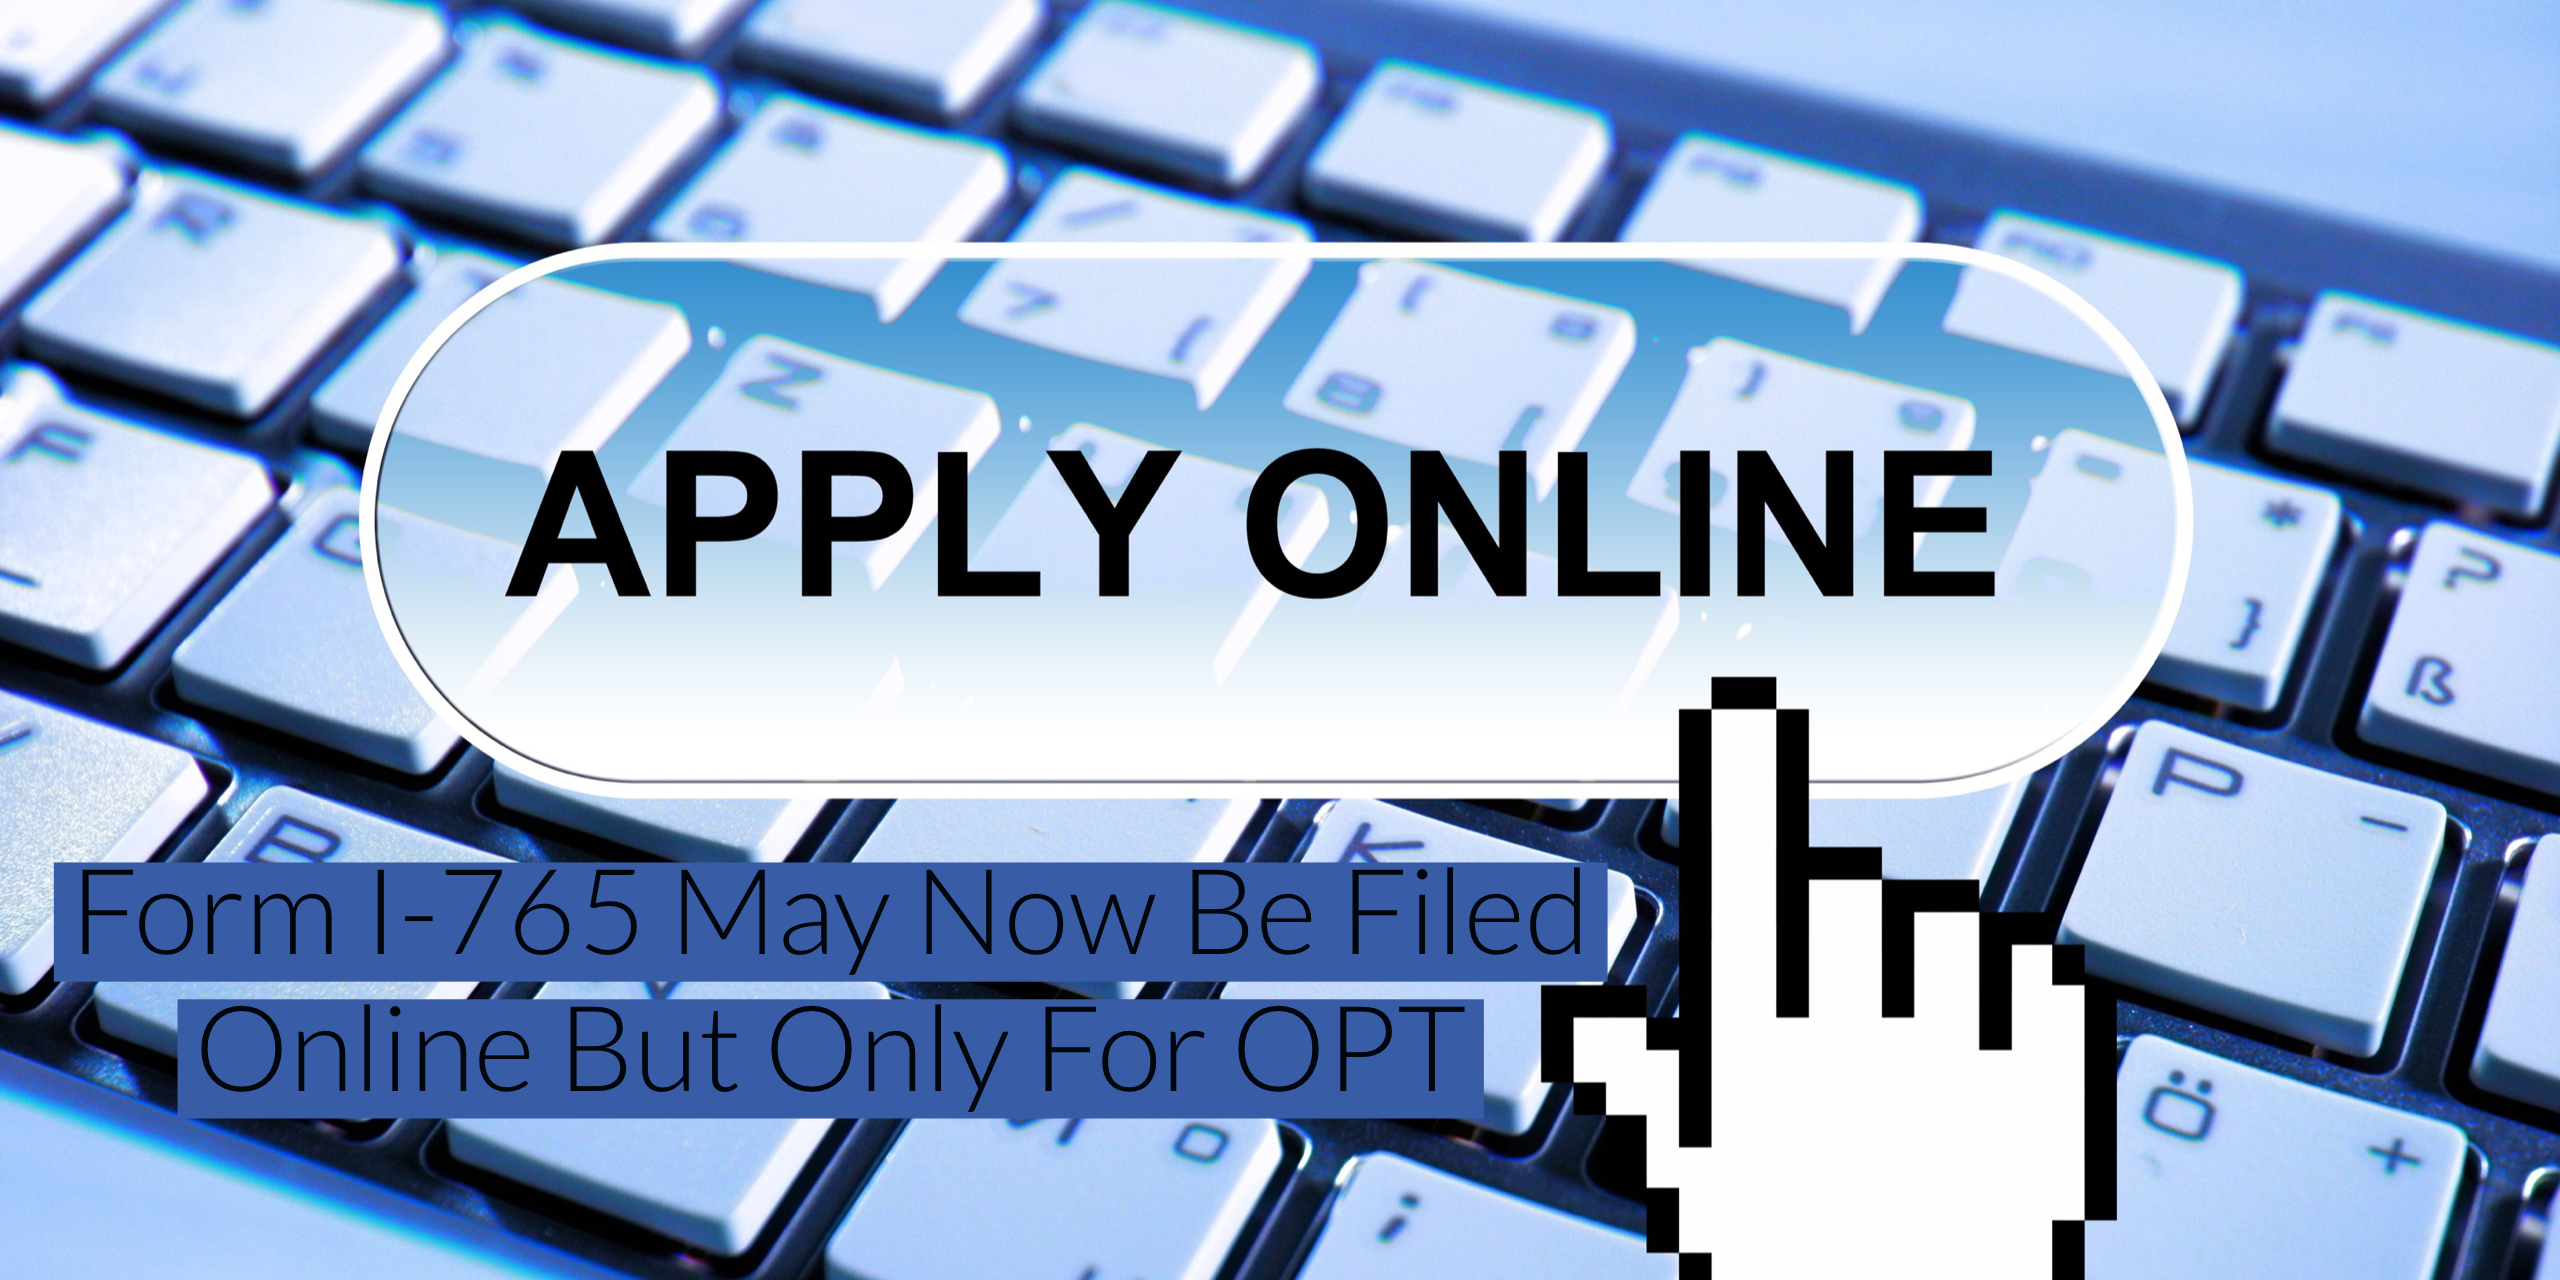 F-1 OPT May Now be Filed Online via Online Form I-765